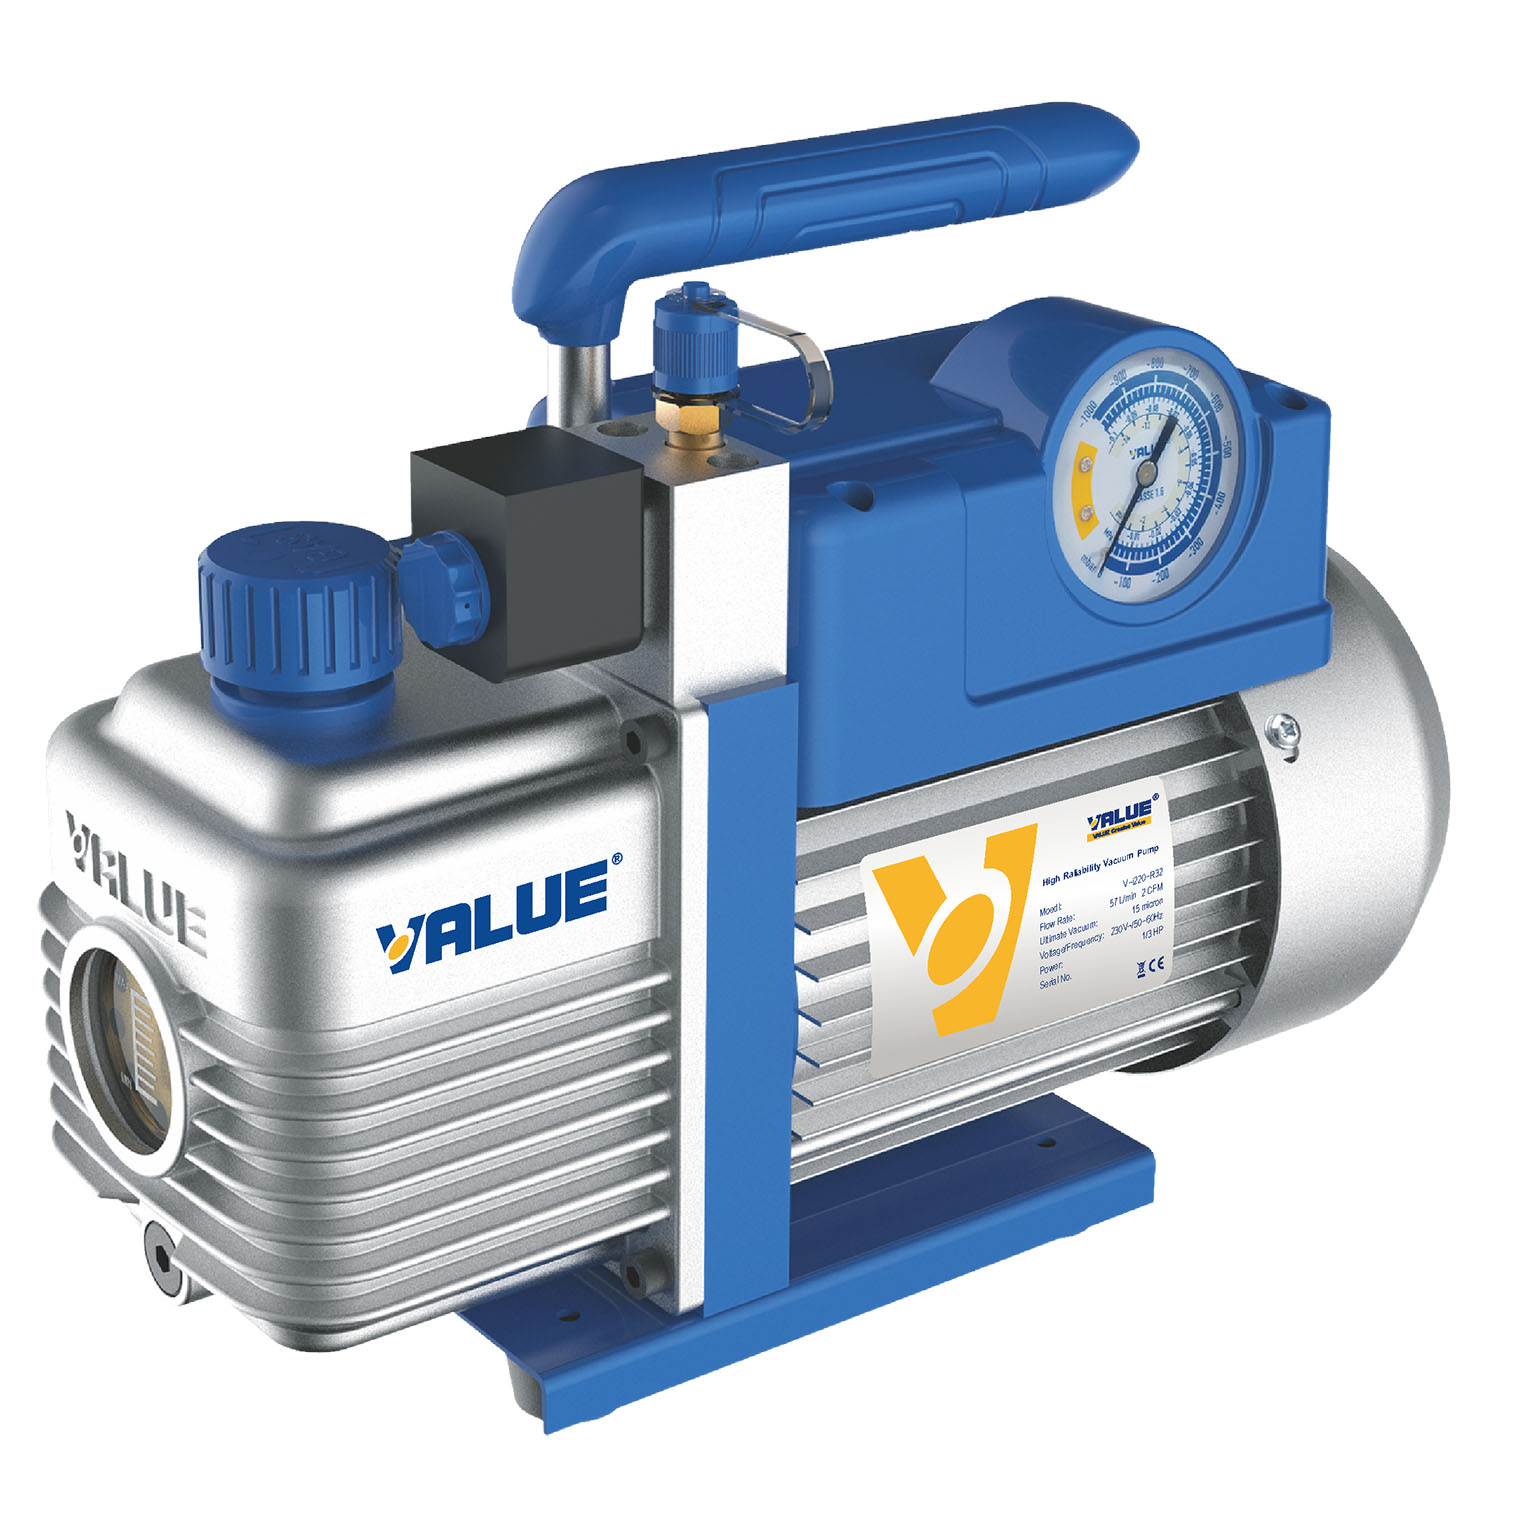 Vacuum pump, double stage, suitable for A2L, flow rate 51 litri/minute, motor 1/3 HP, vacuum rate  2 x10(-2) mbar - 0,02 mbar/2 Pa/15 micron - with solenoid valve and vacuum gauge